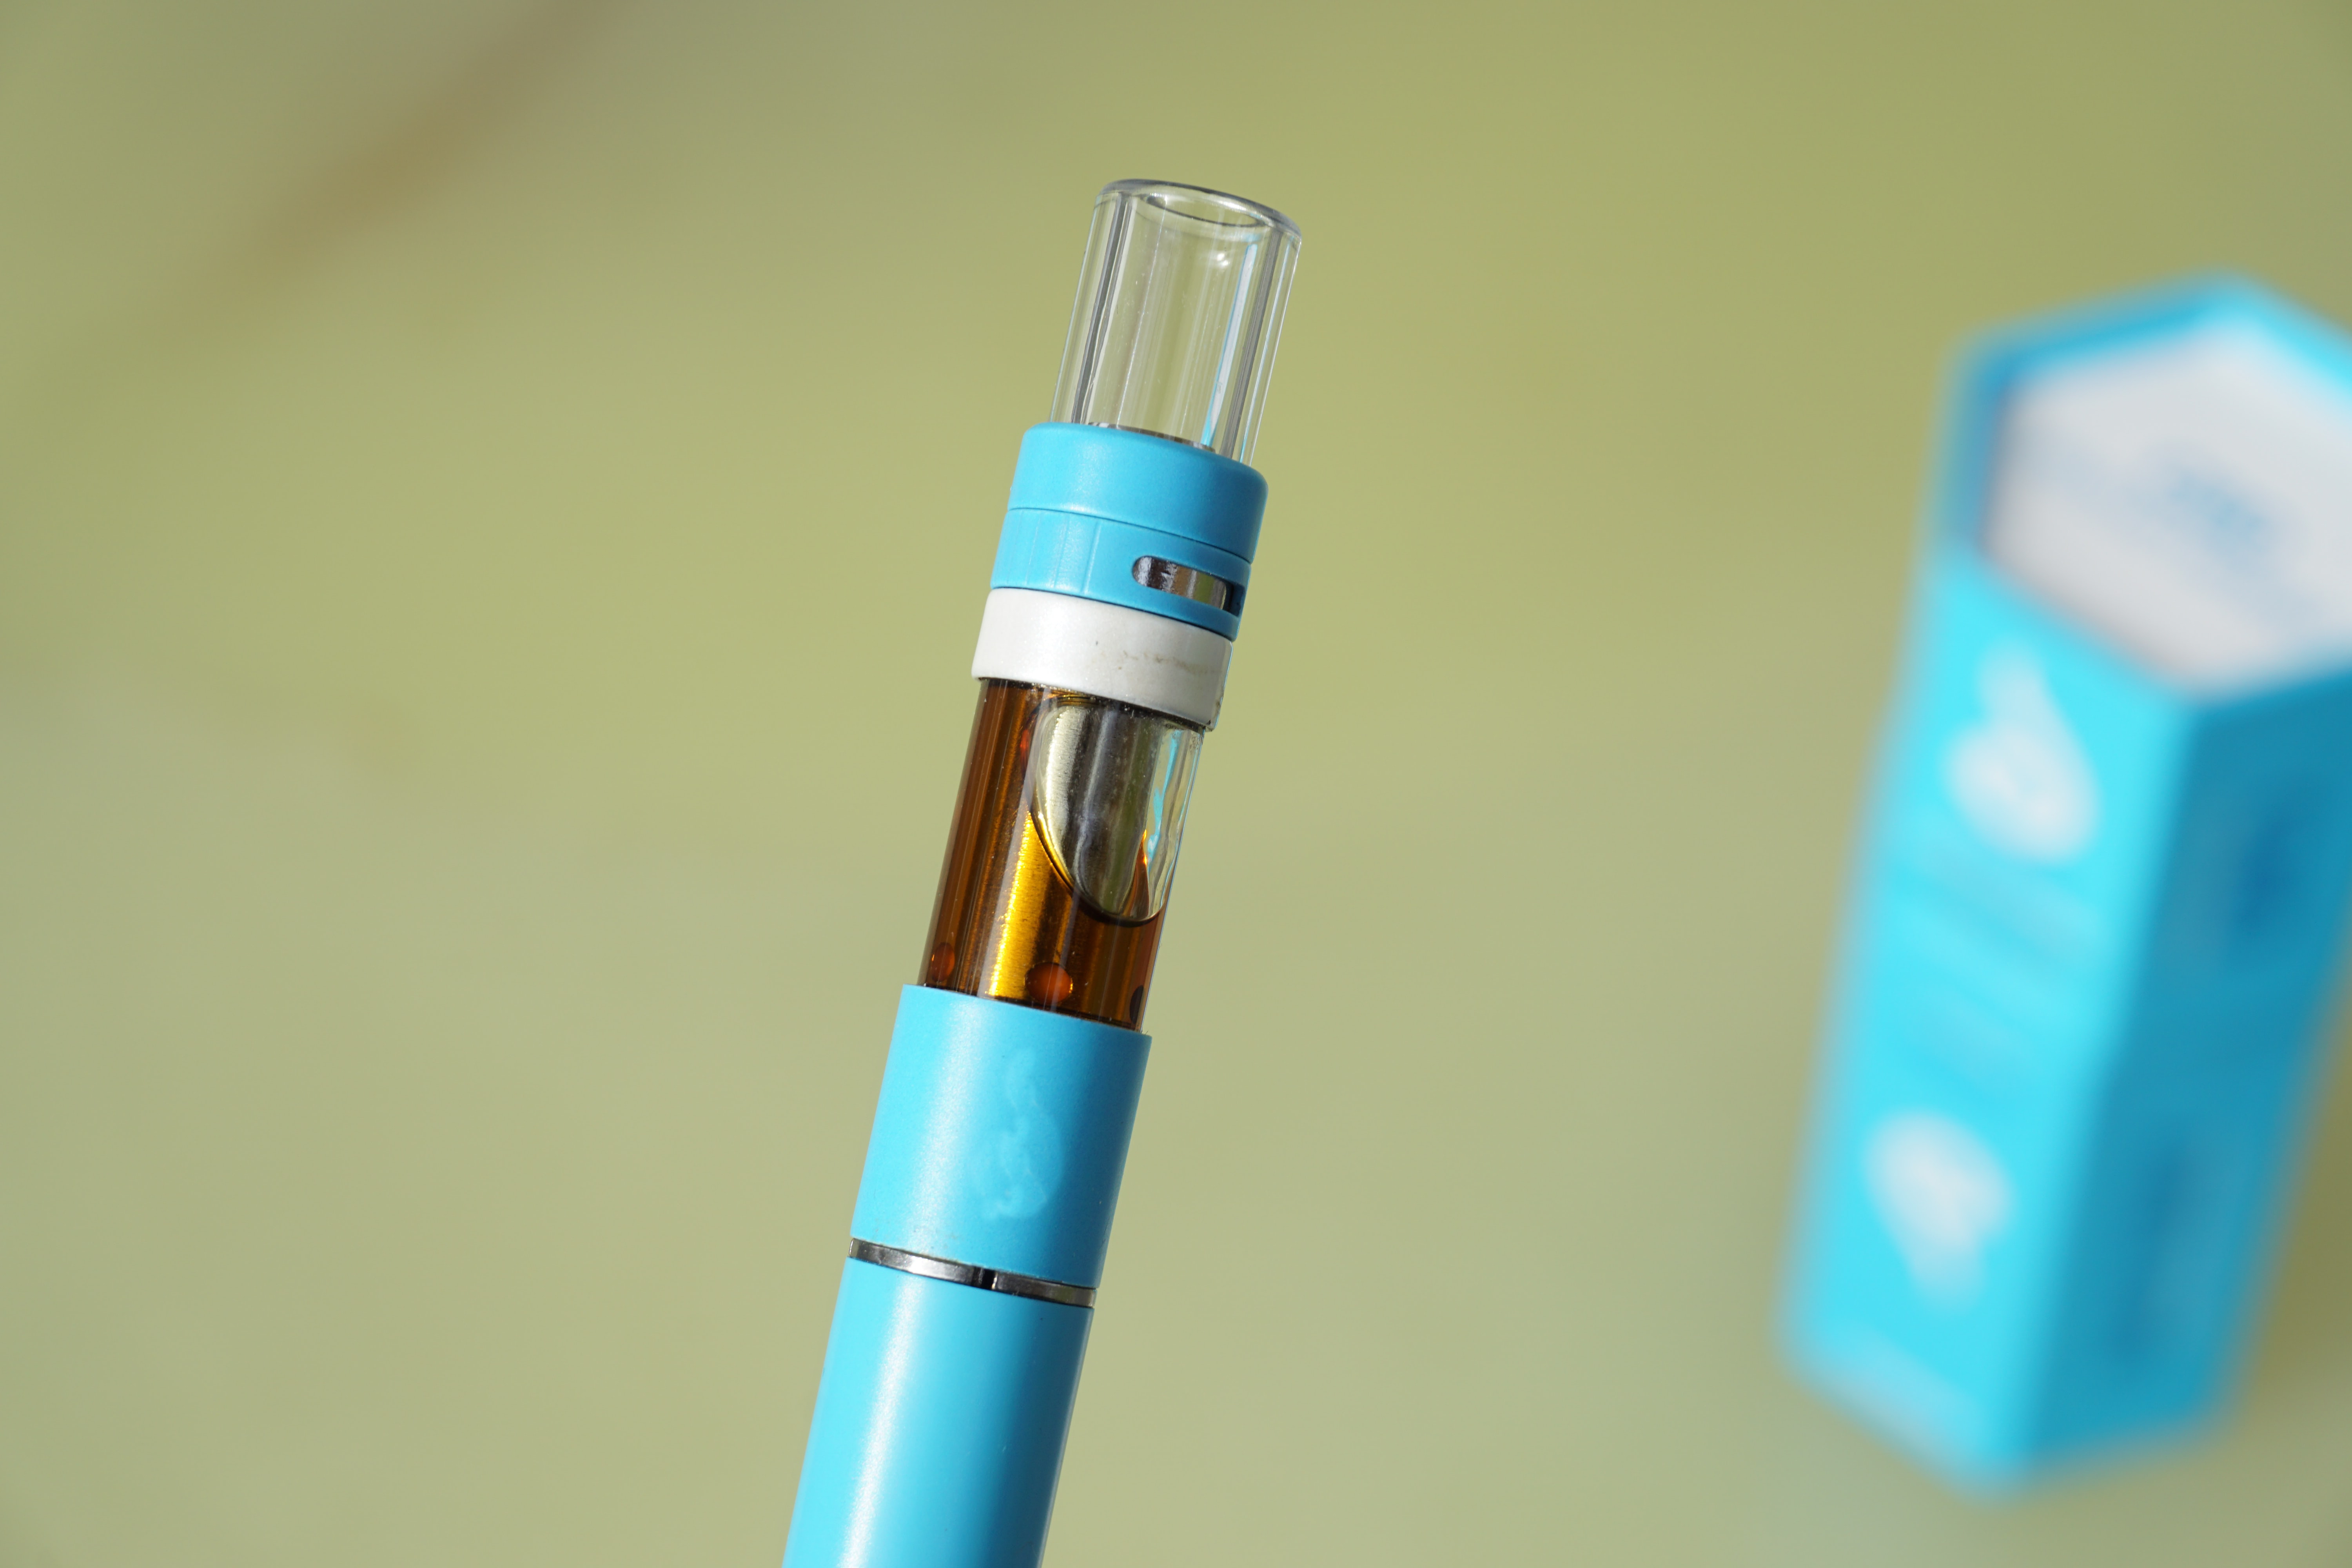 Vaping and Wax Pens: New Ways of Consuming Among Young People - Portage